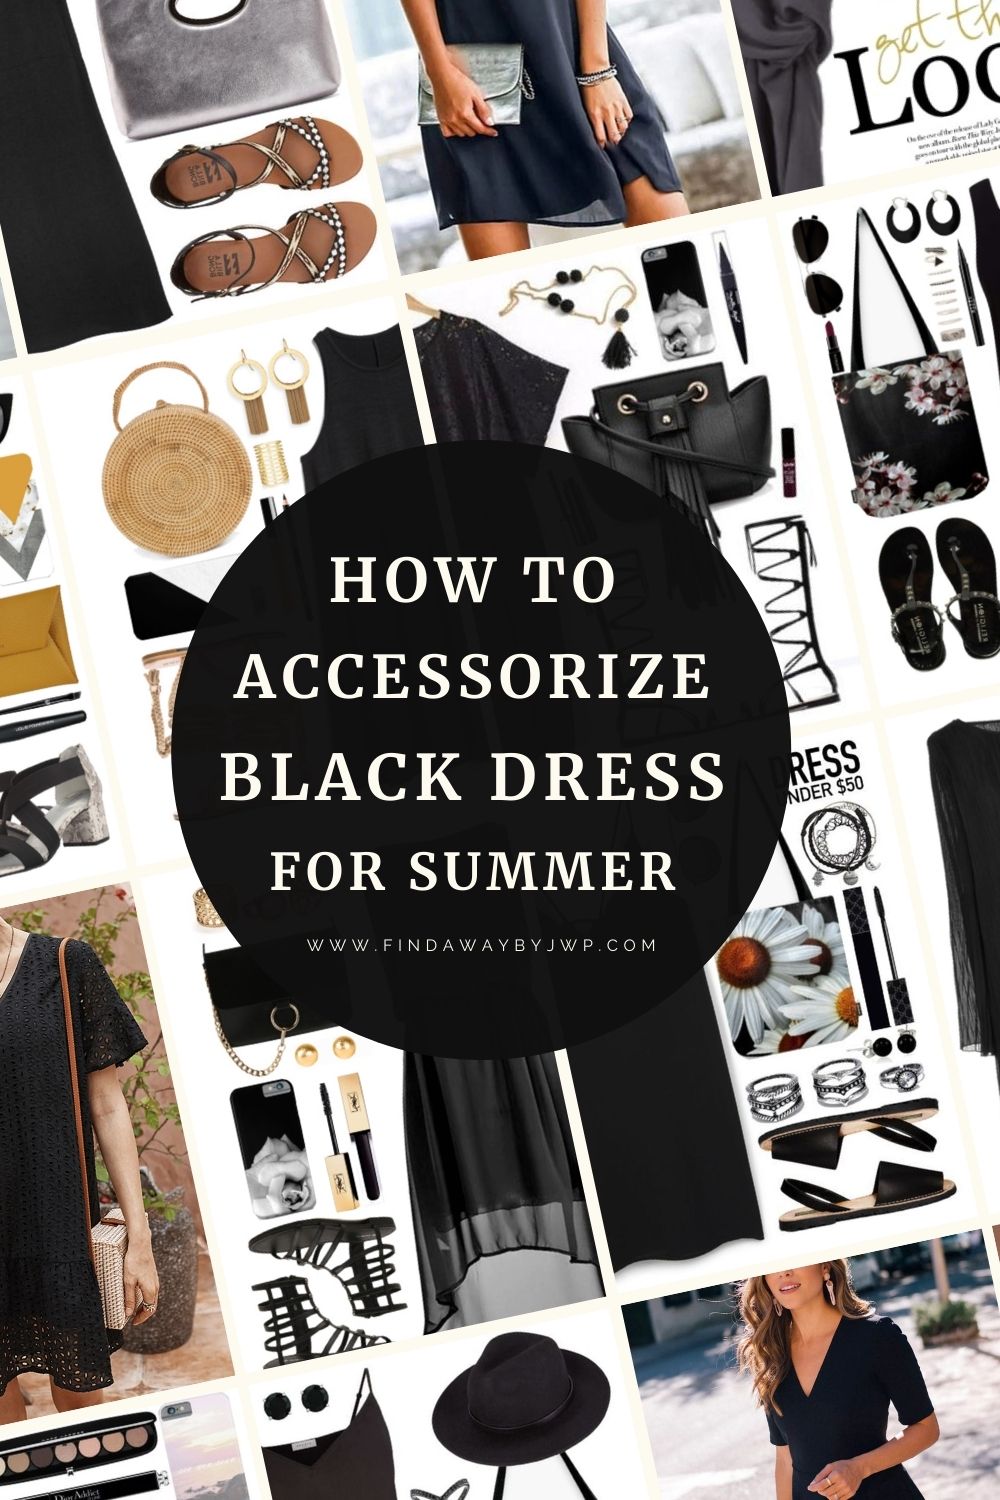 7 to accessorize a black dress summer - spring summer